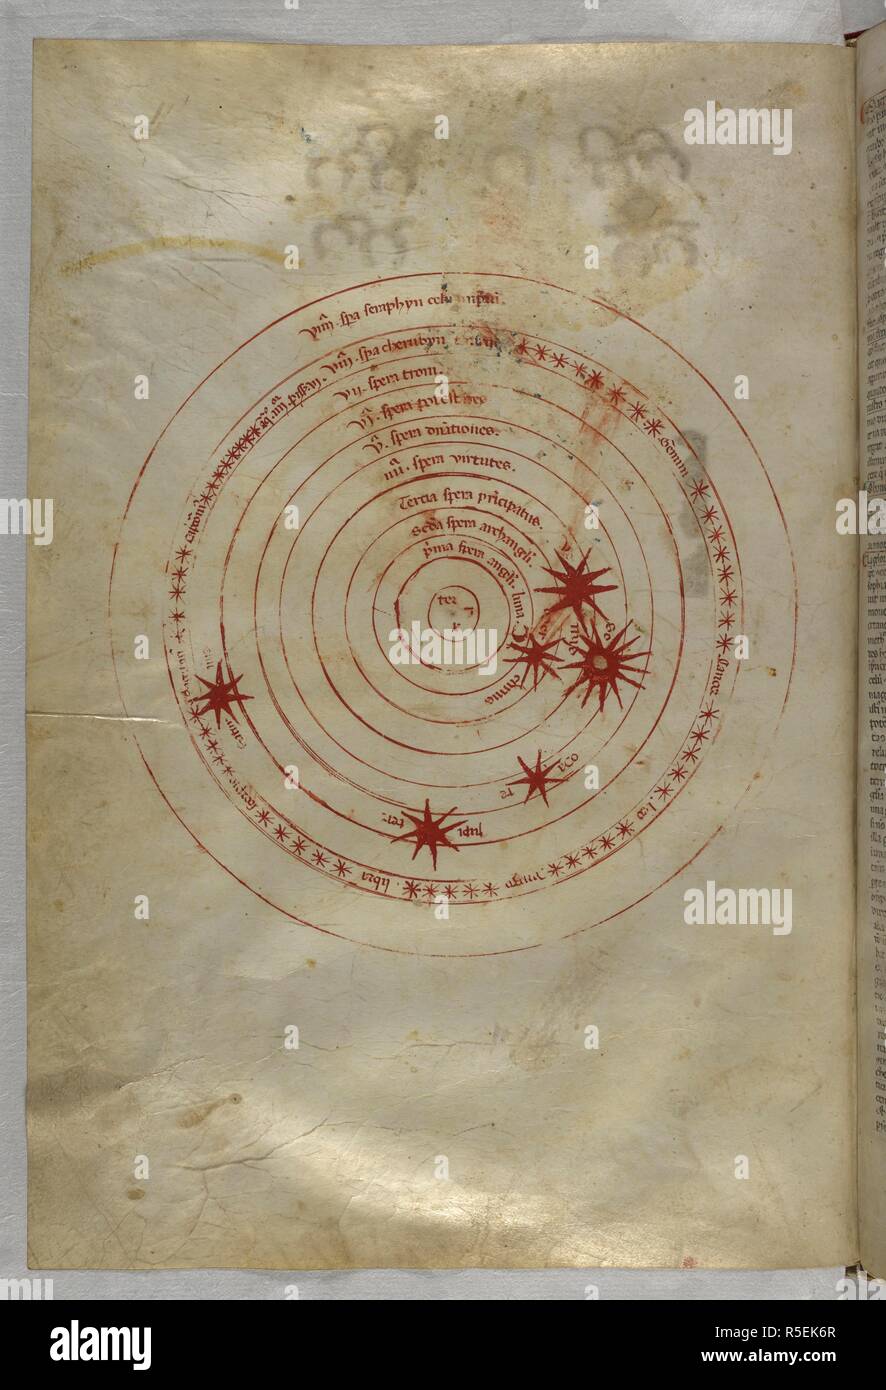 Circular diagrams of the spheres of Heaven. Dante Alighieri, Divina Commedia ( The Divine Comedy ), with a commentary in Latin. 1st half of the 14th century. Source: Egerton 943, f.128v. Language: Italian, Latin. Stock Photo